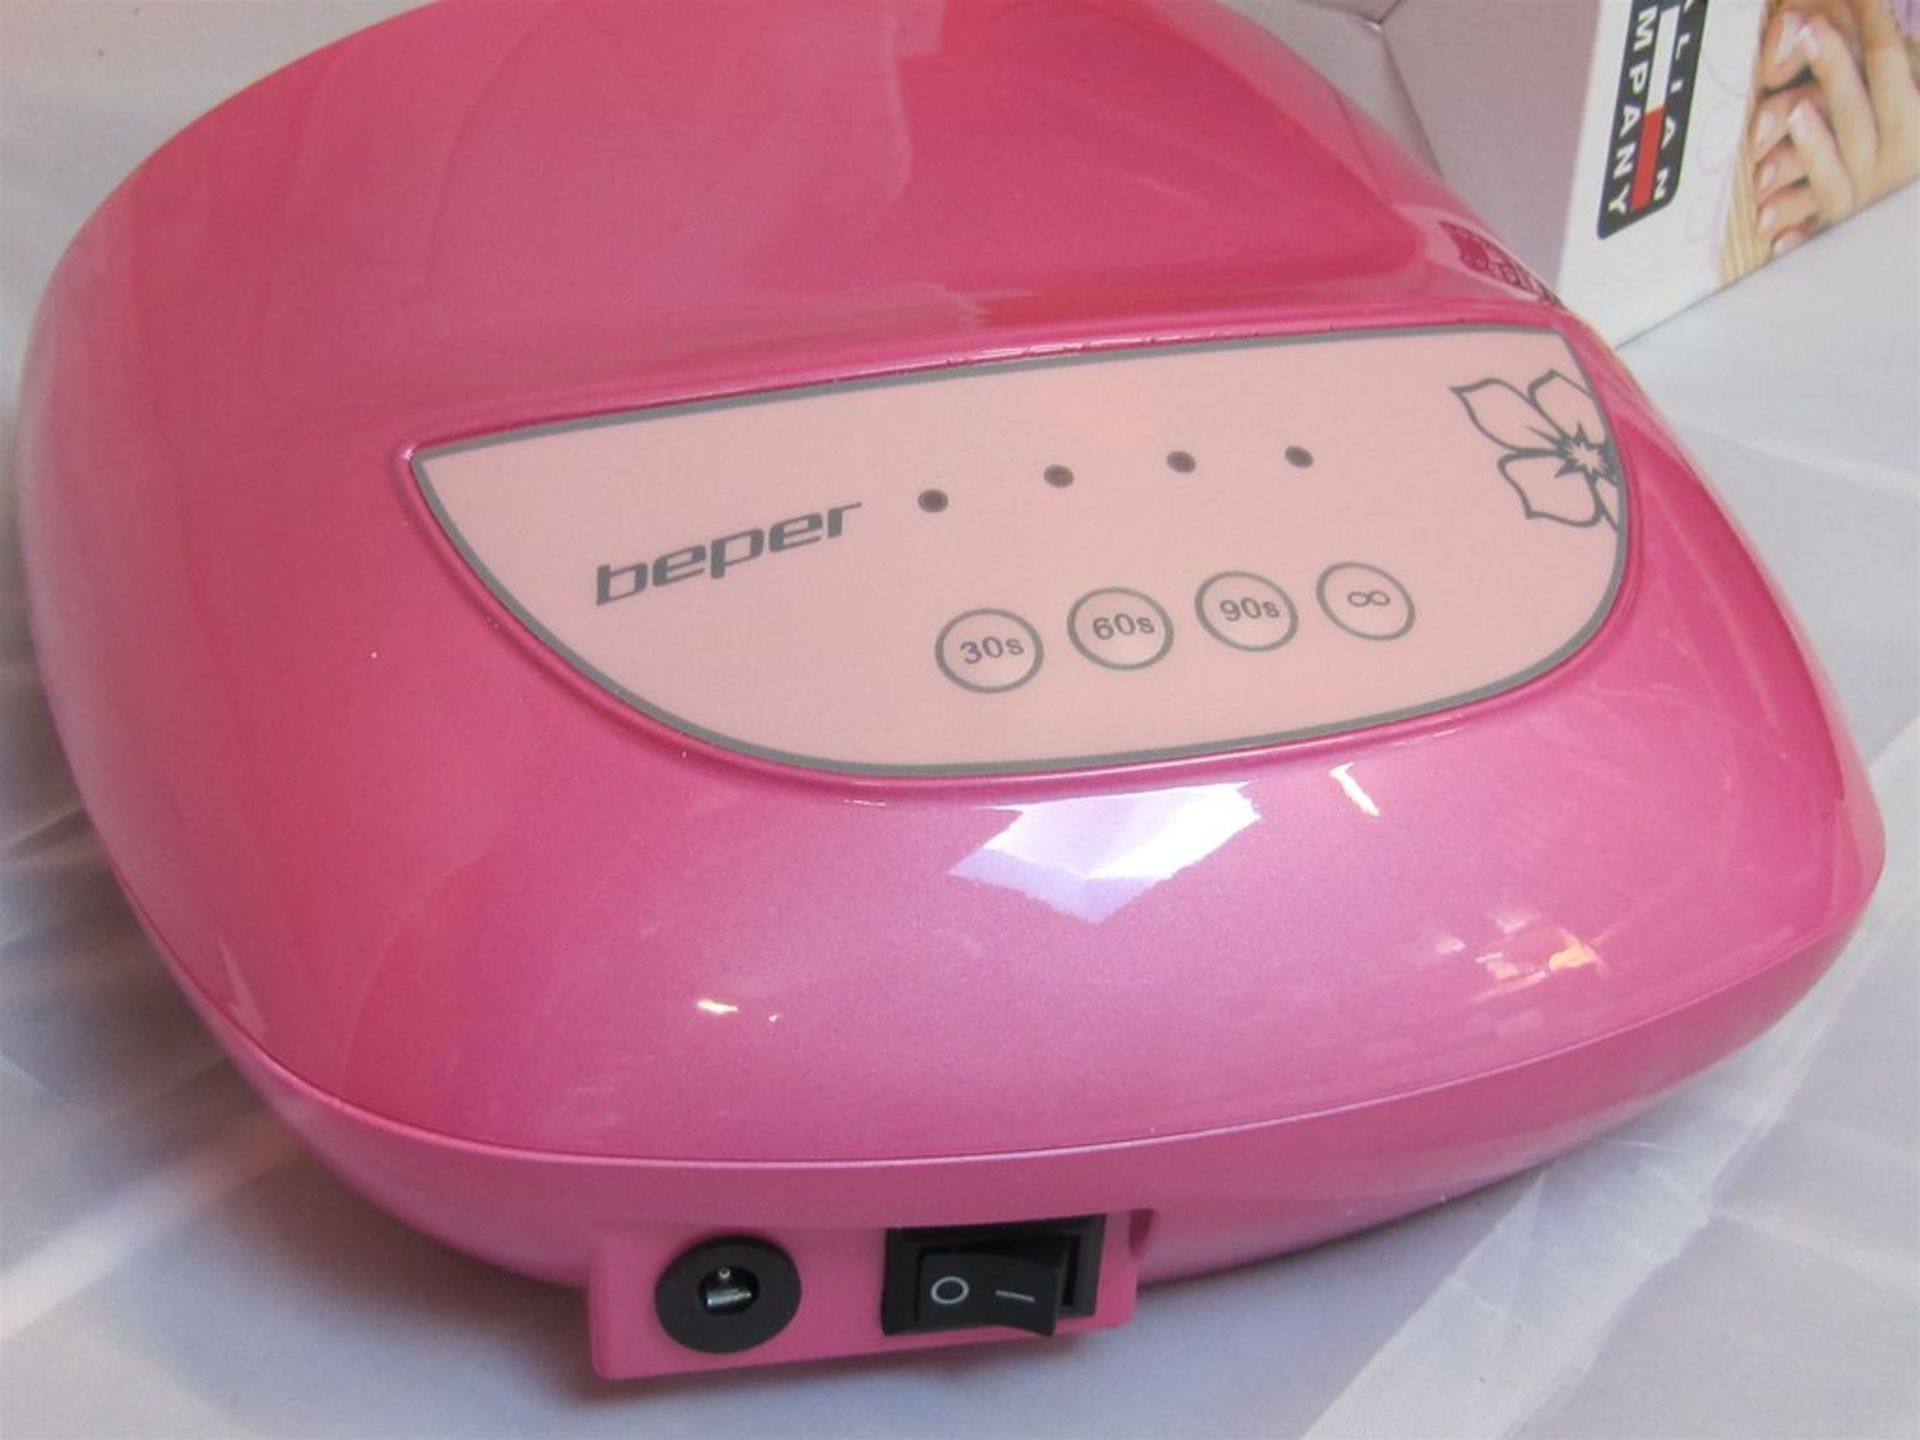 74) Beper LED Nail Lamp. 12w Rapid Dry Time. No vat on Hammer. - Image 2 of 4